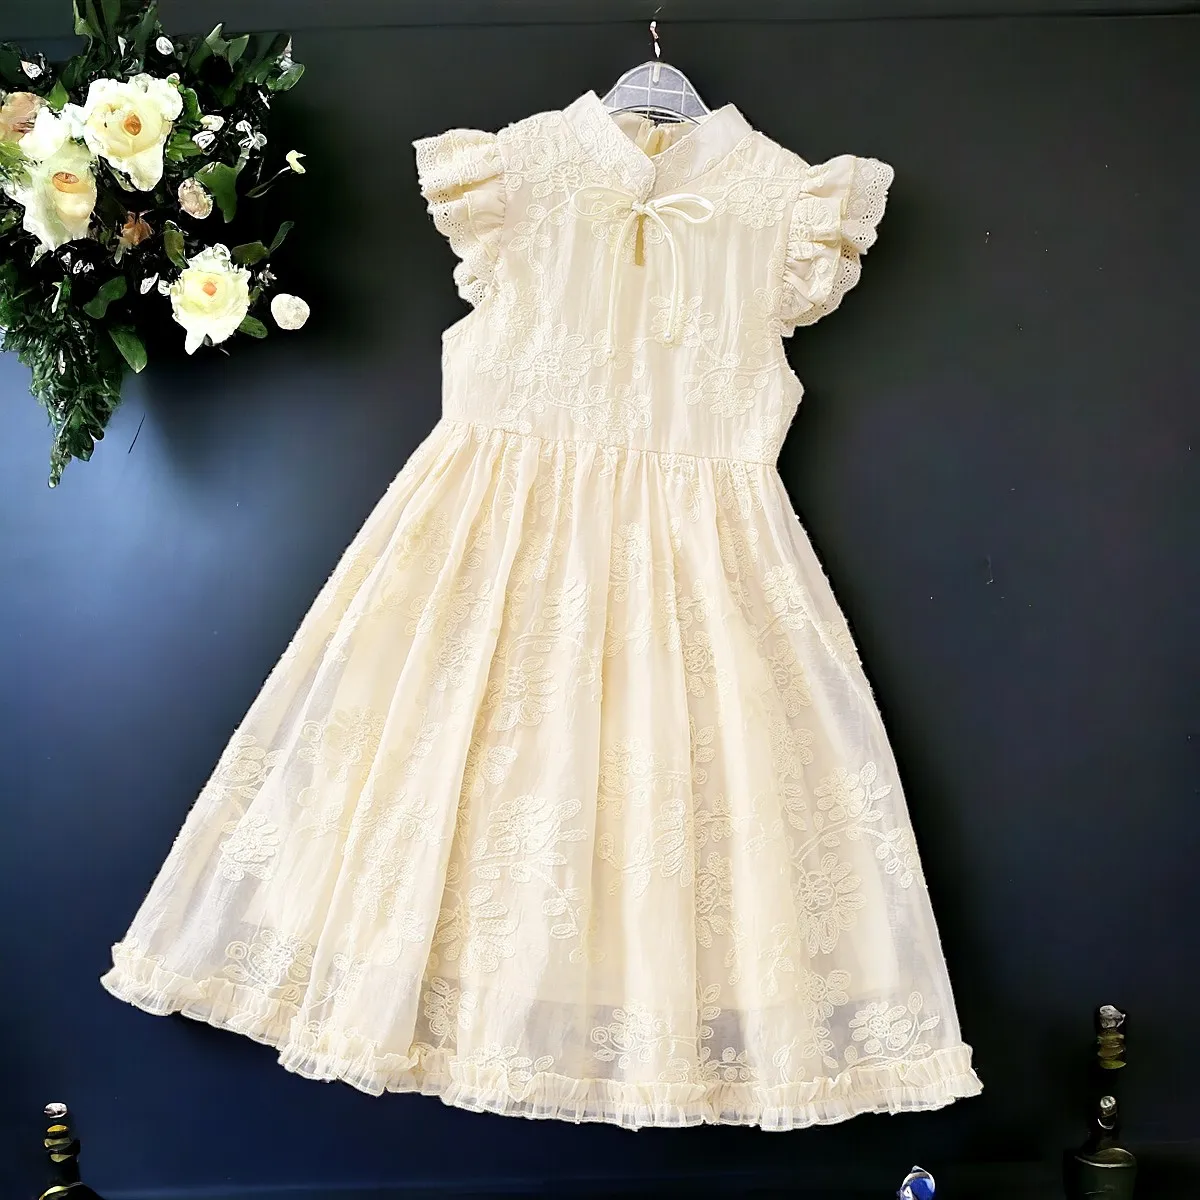 

Girls Lace Dresses Baby Embroidery Flower Dresses Summer Kids Outfits Teens Floral Wedding Princess Costumes 5 6 7 8 9 12 Years